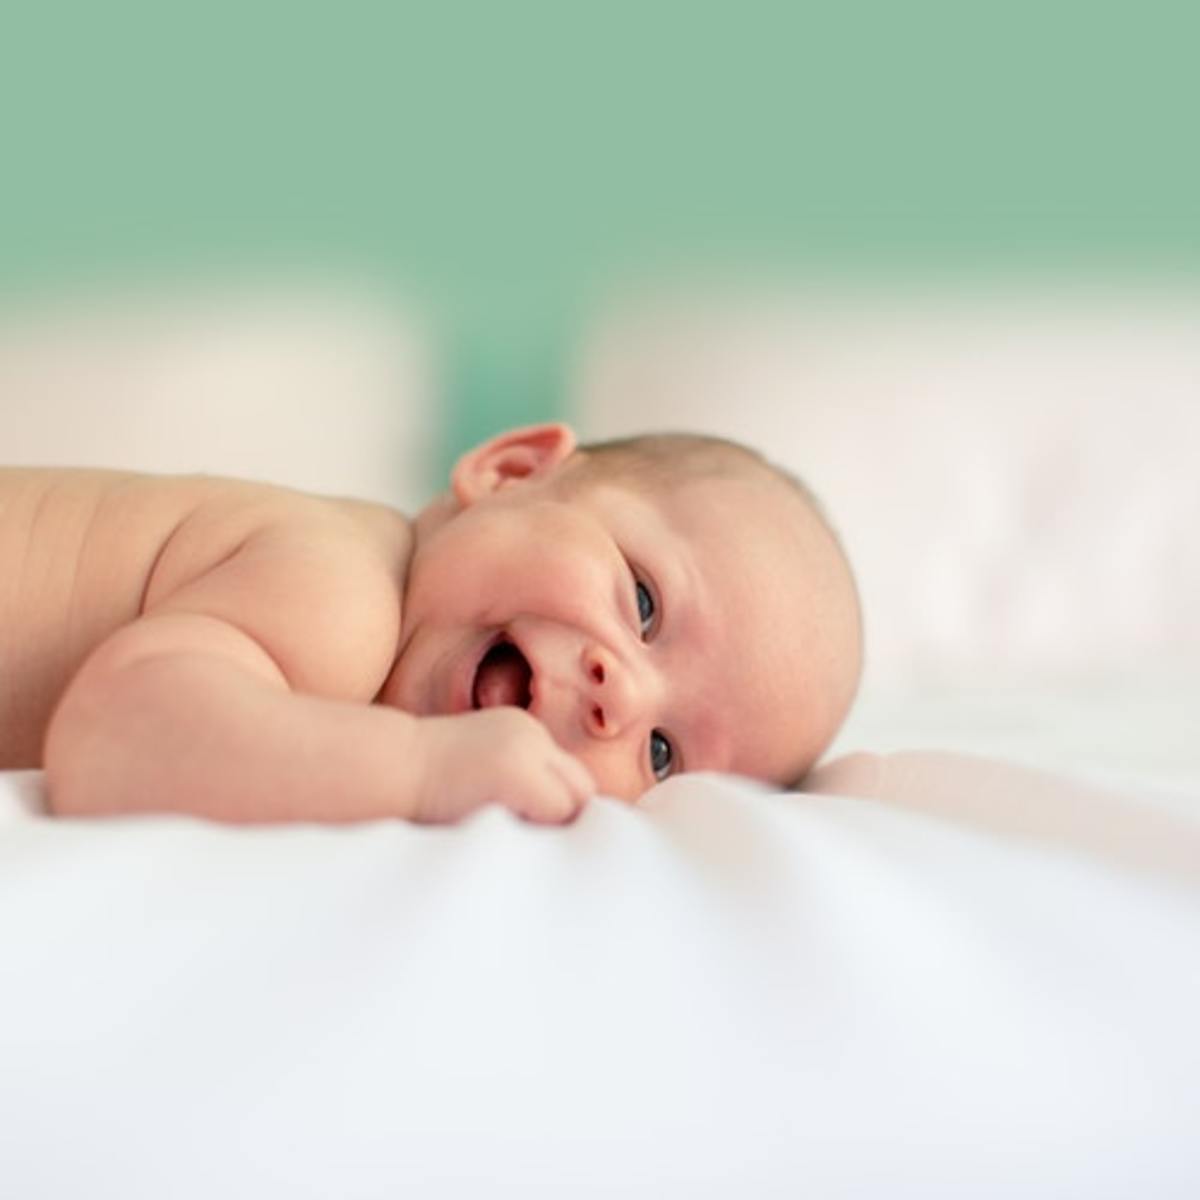 Tummy time for your baby is beneficial